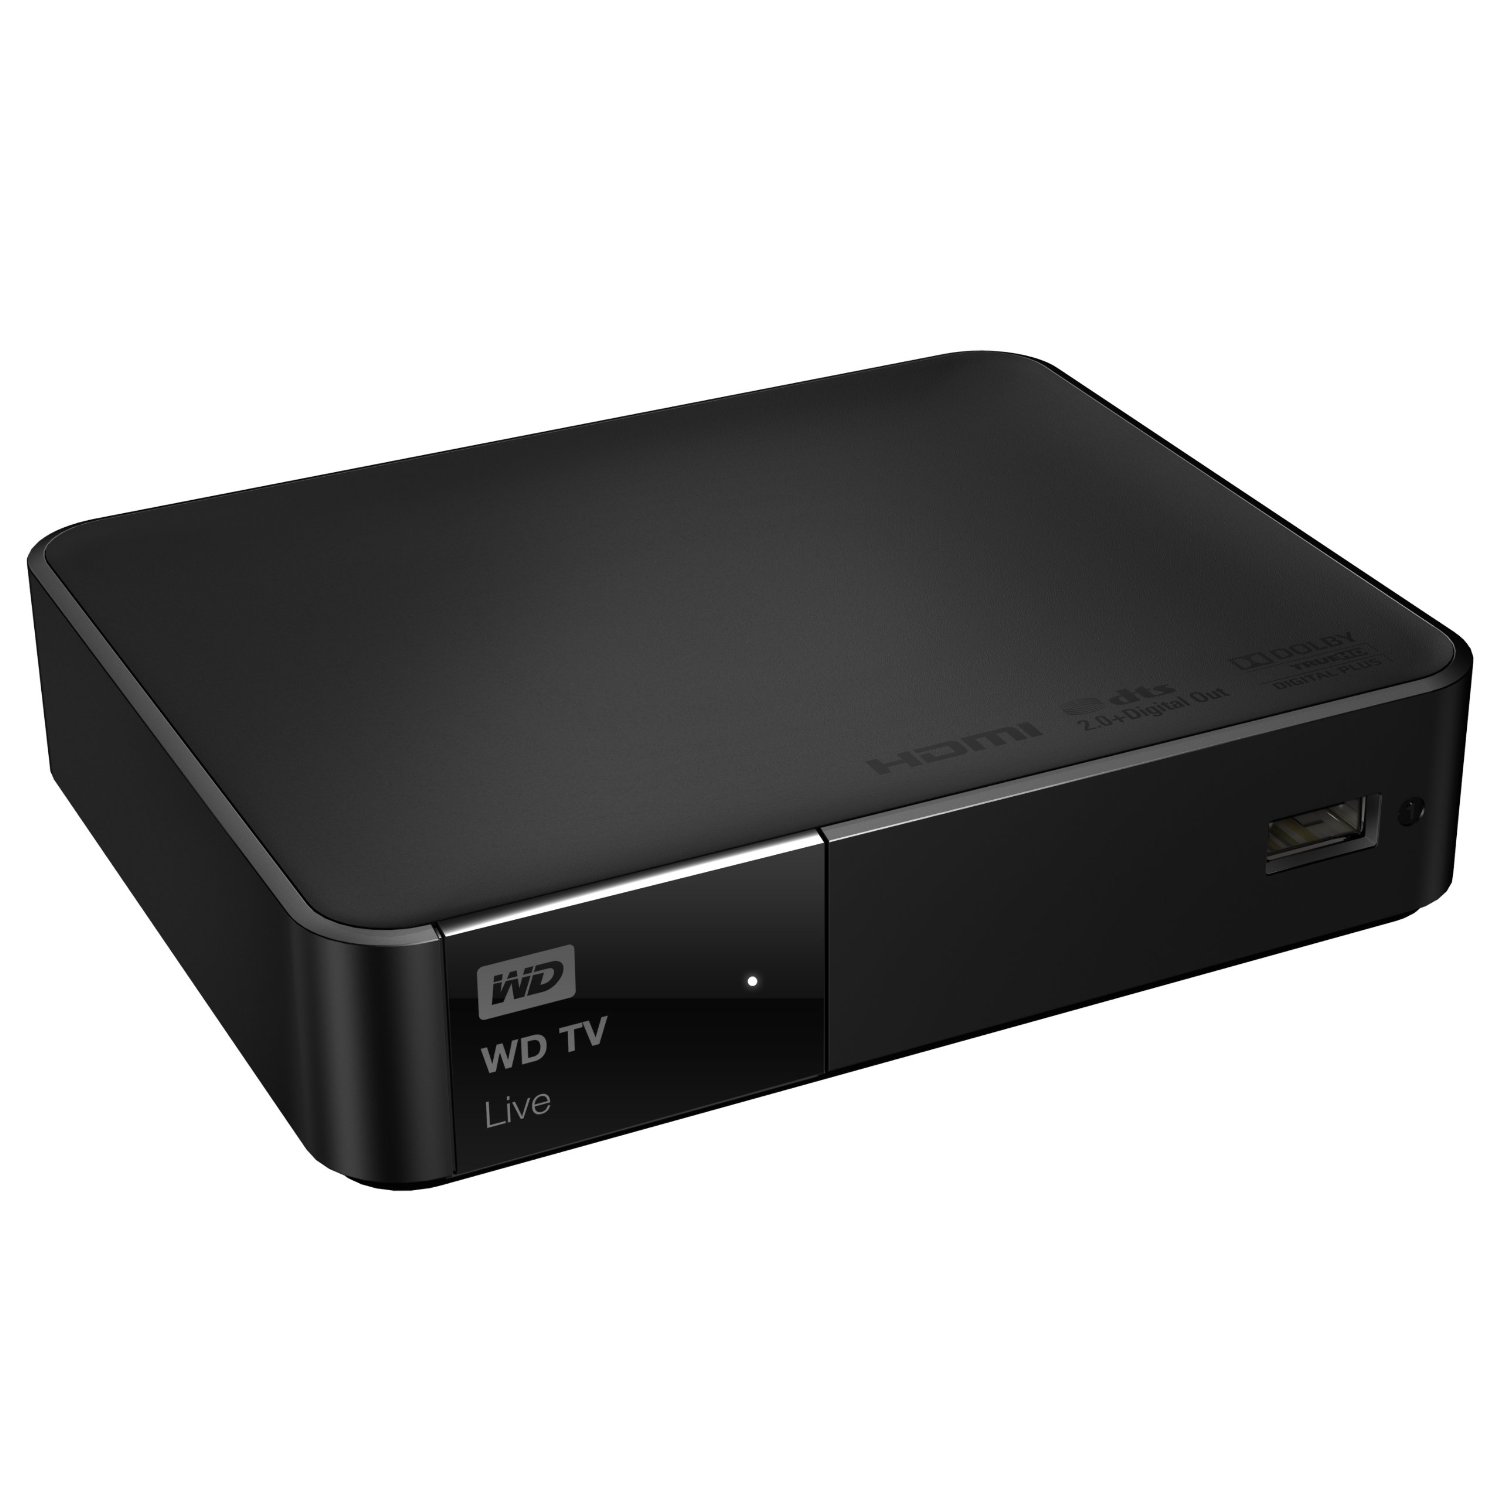 http://thetechjournal.com/wp-content/uploads/images/1110/1318016928-western-digital-wd-tv-live-streaming-media-player-5.jpg